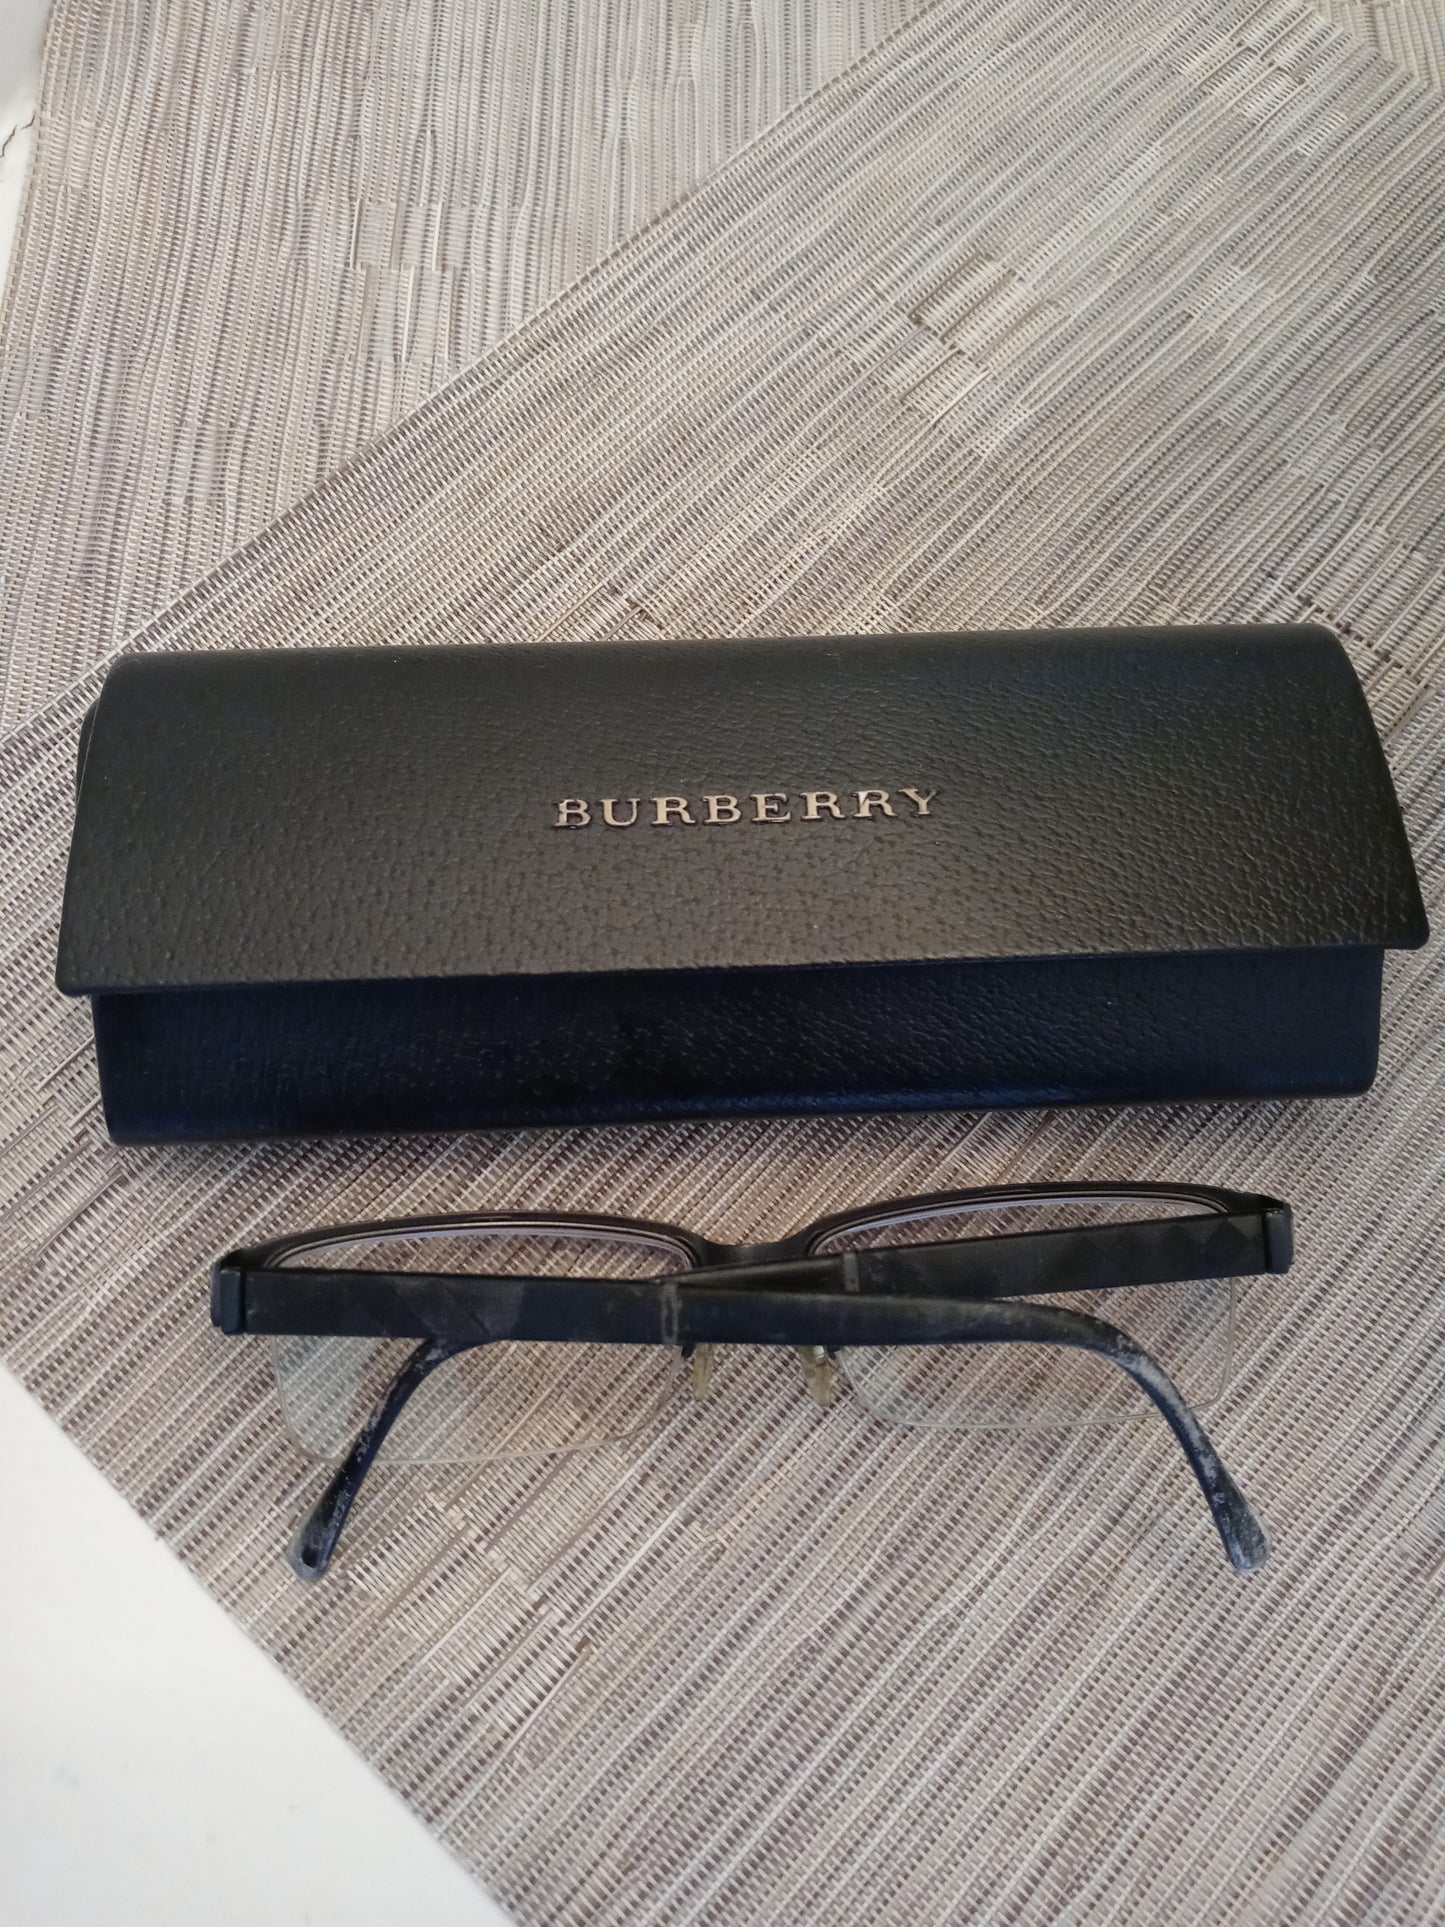 Burberry Glasses Pre Owned Not Sure If They Are Unisex - Fair Condition